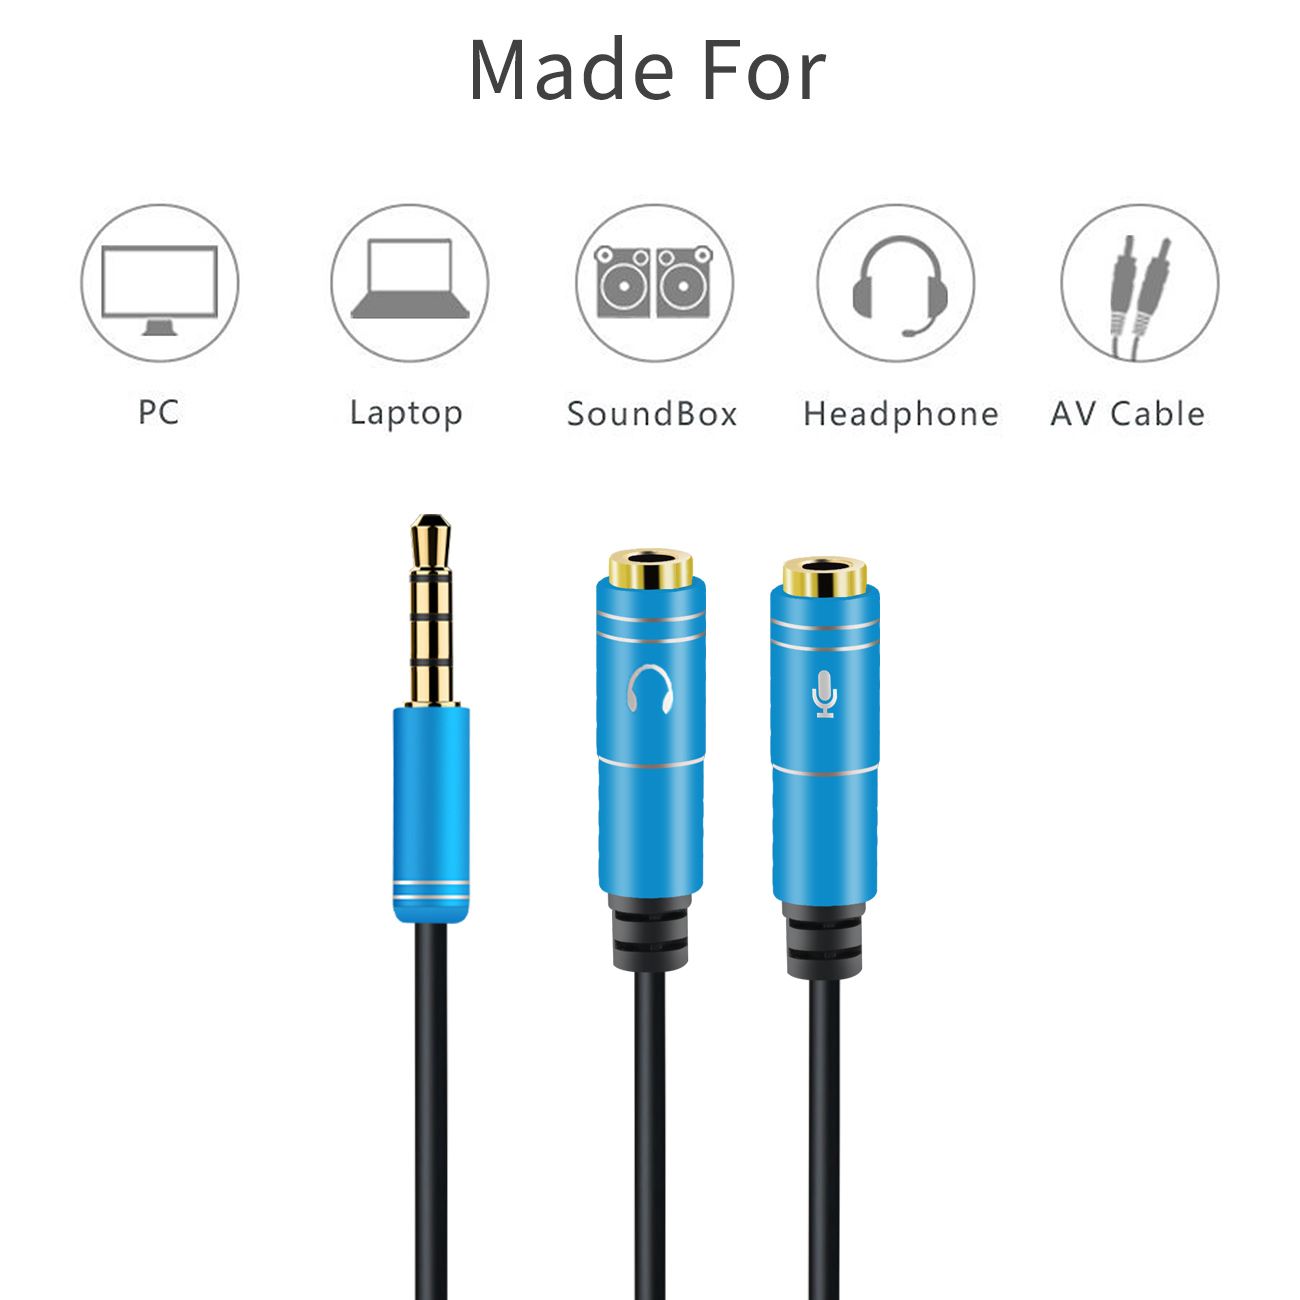 3 5 mm jack headphone mic audio y splitter cable 1 male to 2 female with separate headset microphone adapter 30 cm%20(12)